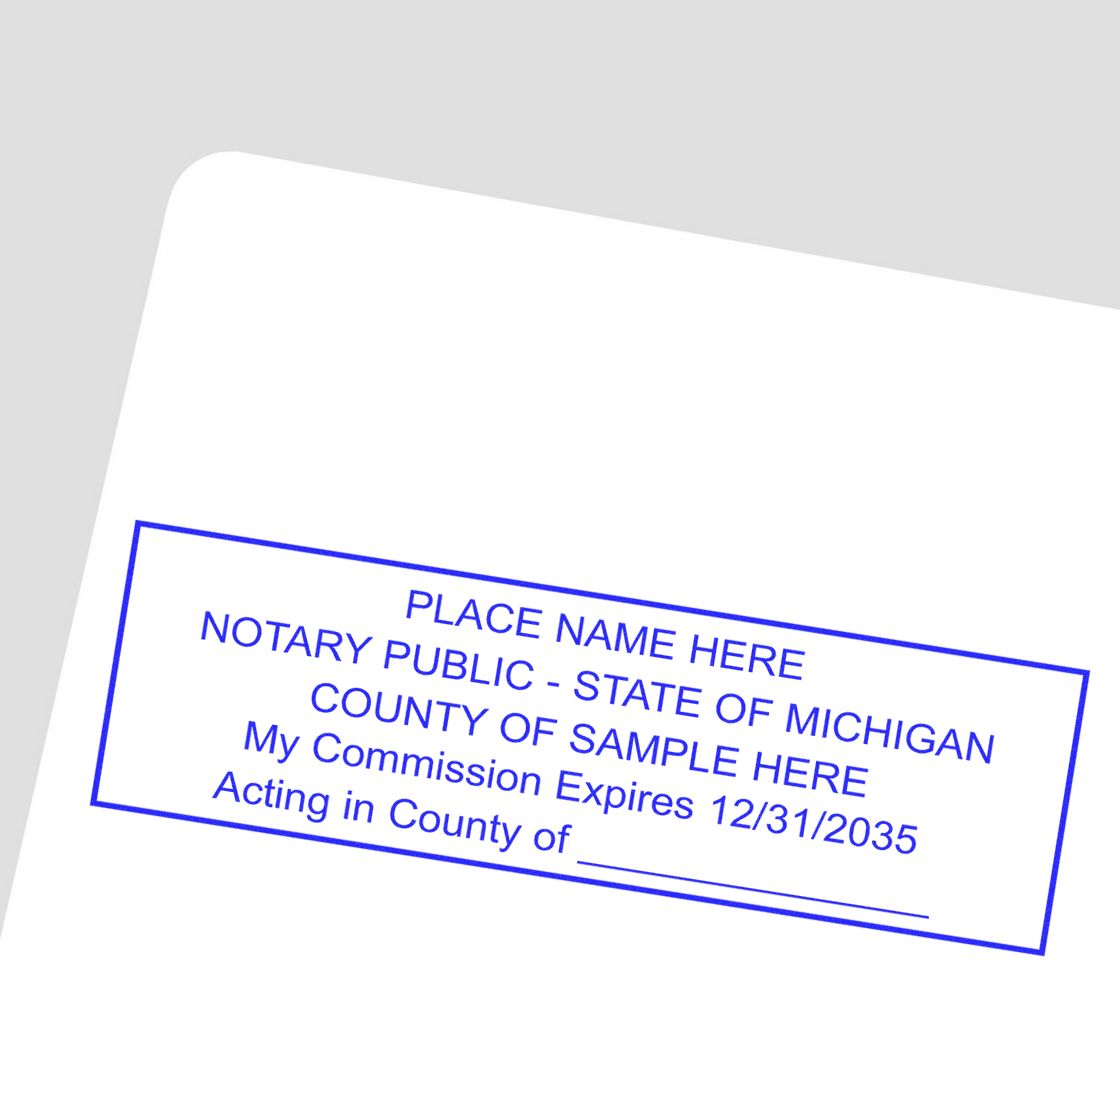 A stamped impression of the Super Slim Michigan Notary Public Stamp in this stylish lifestyle photo, setting the tone for a unique and personalized product.